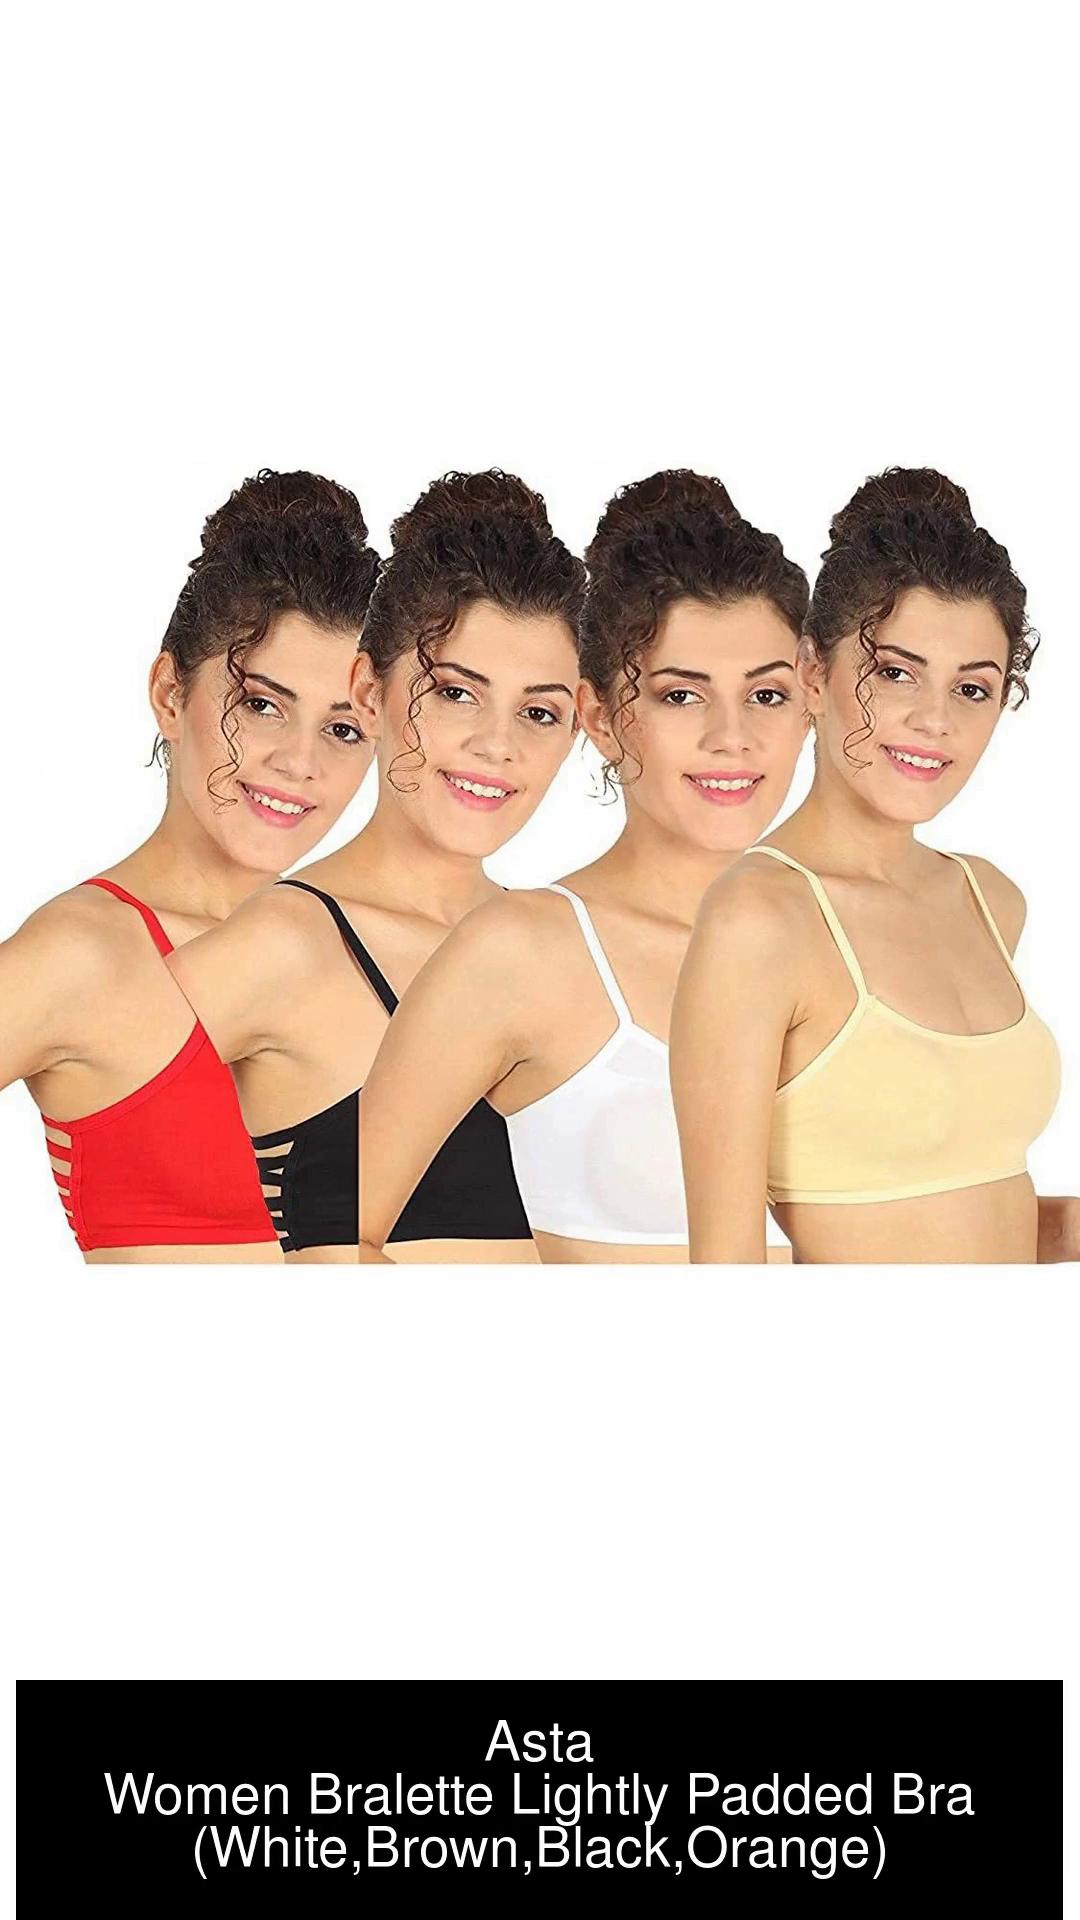 Women See-Through Lace Soft Transparent Everyday Bra Pack2 